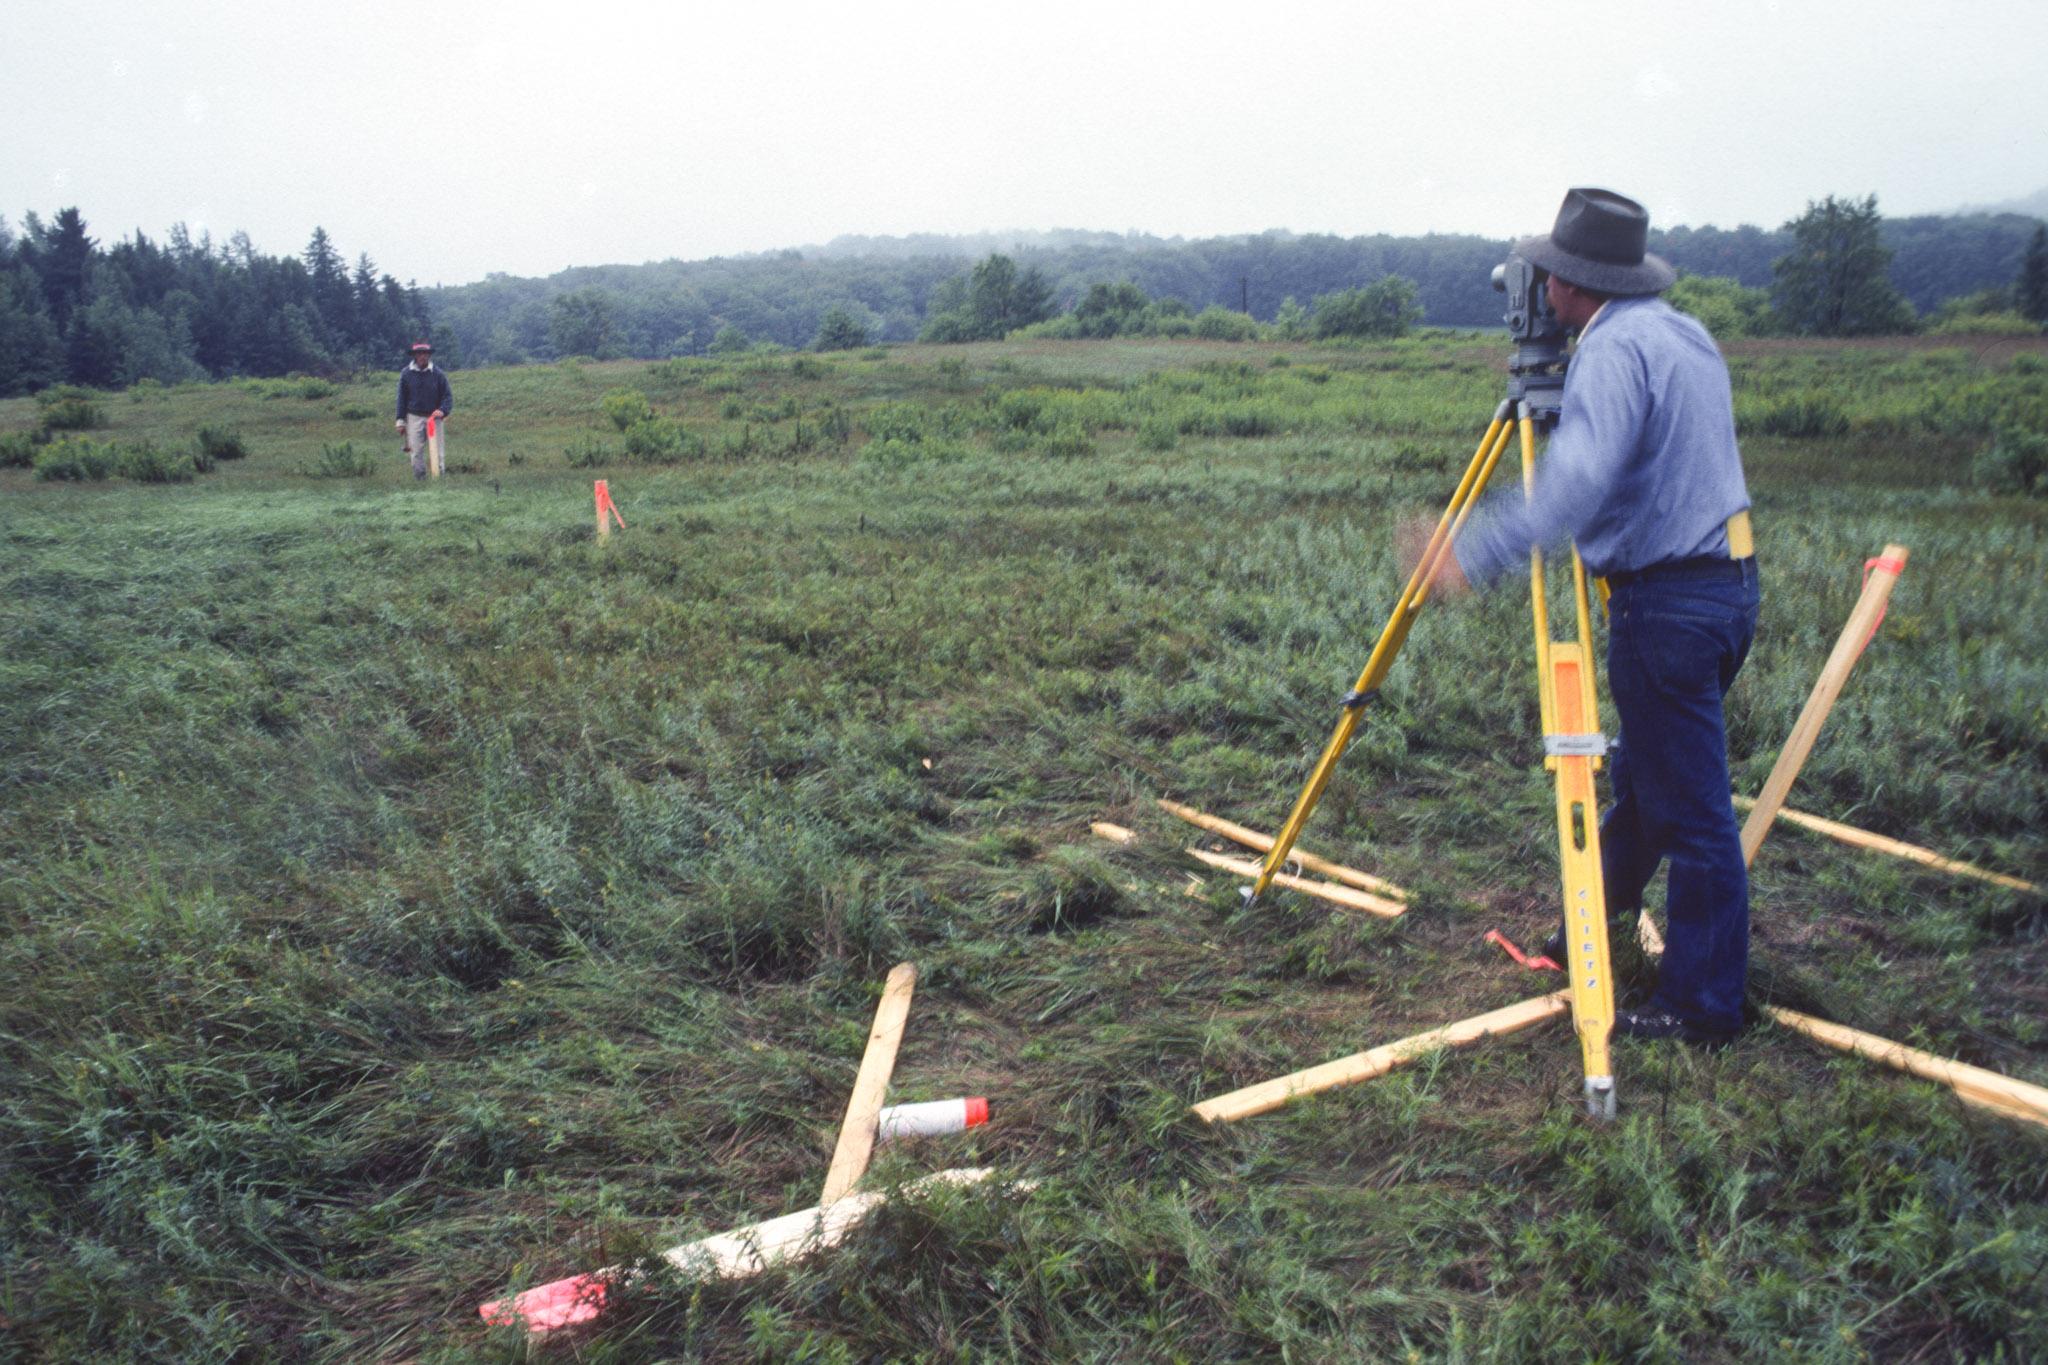 two figures stand far apart in a green field, looking through surveying equipment